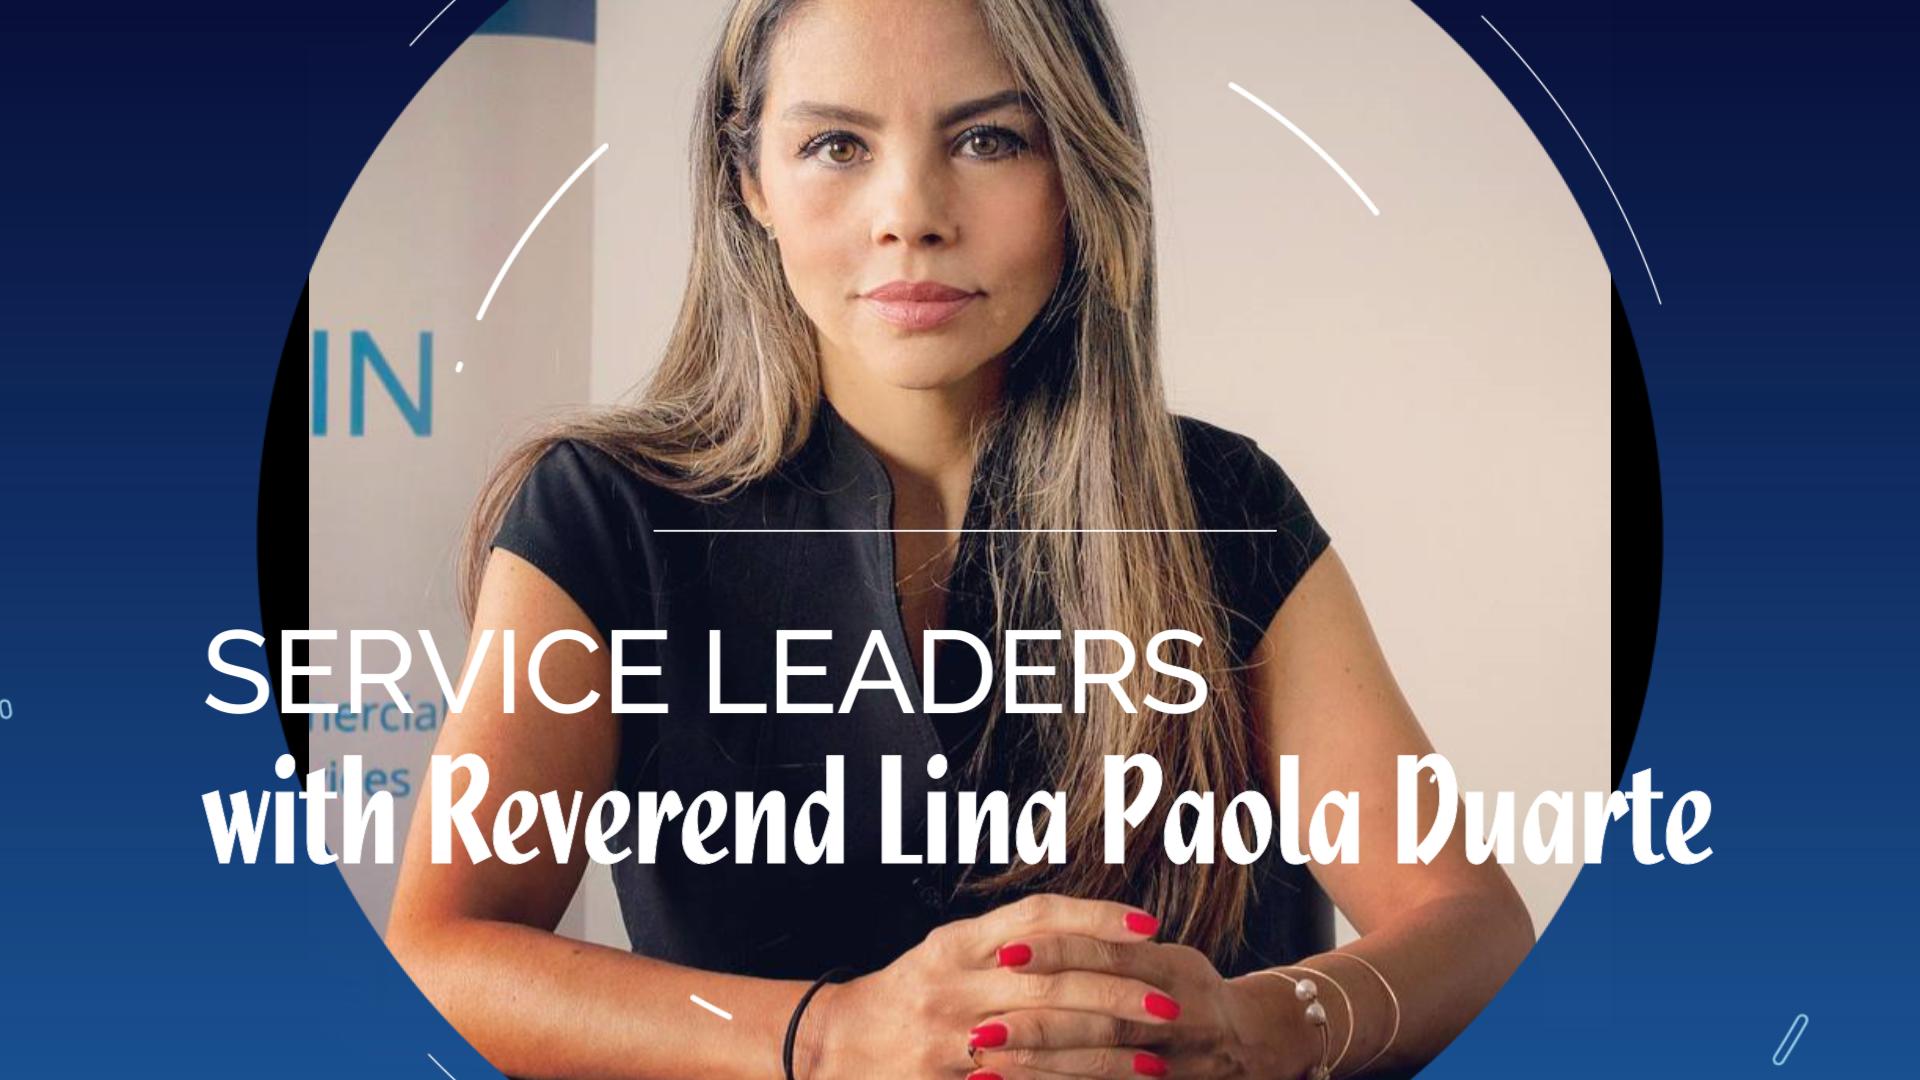 Service Leaders with Reverend Lina Paola Duarte